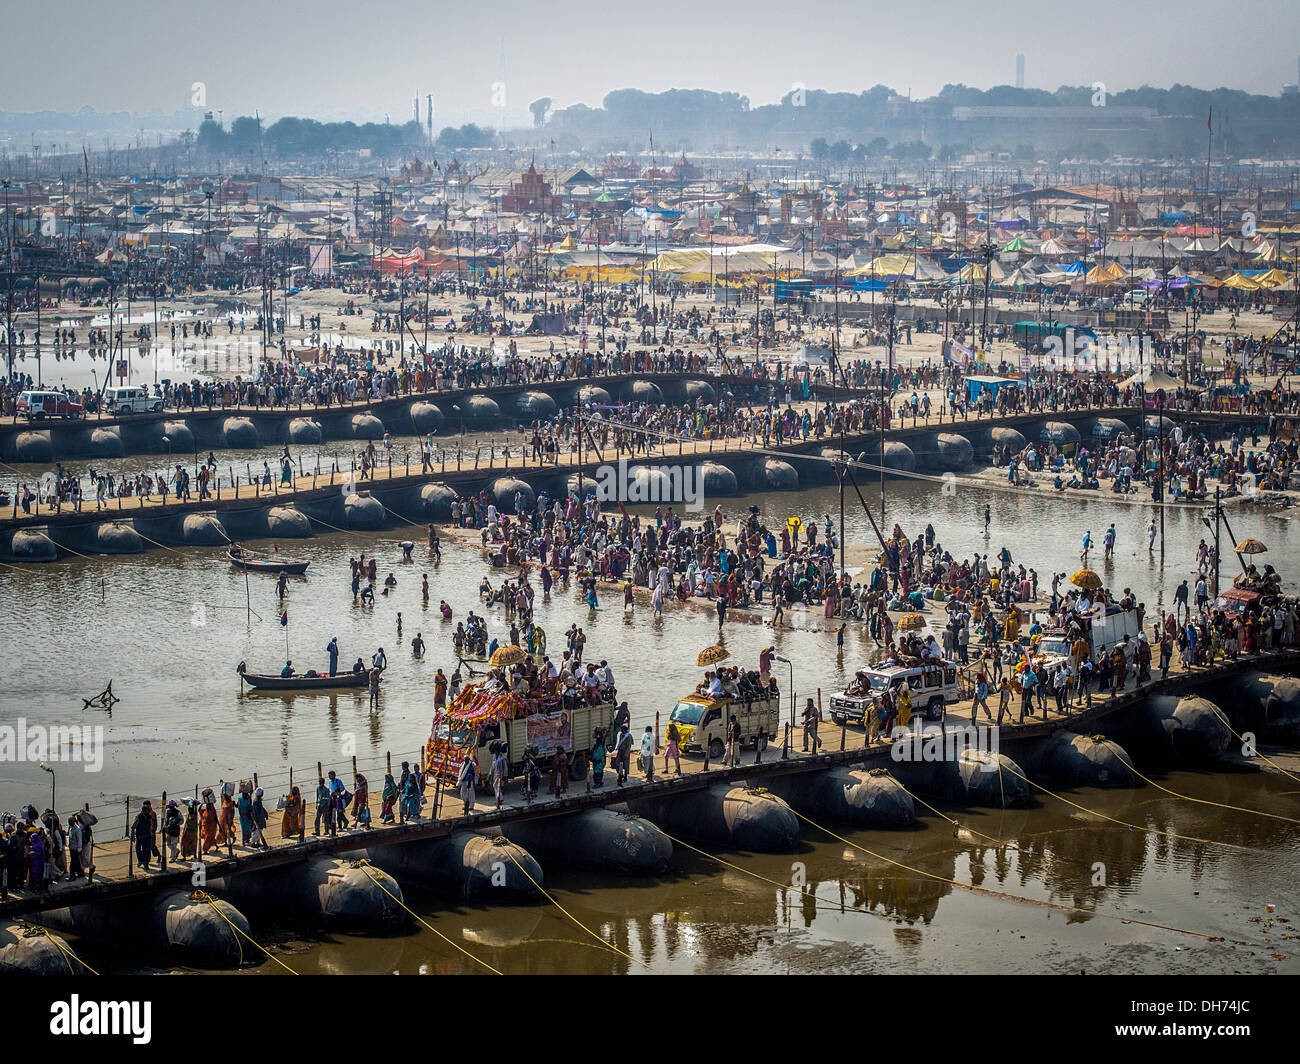 Thousands of Hindu devotees crossing pontoon bridges over the Ganges River at Kumbh Mela 2013 in Allahabad, India. Stock Photo